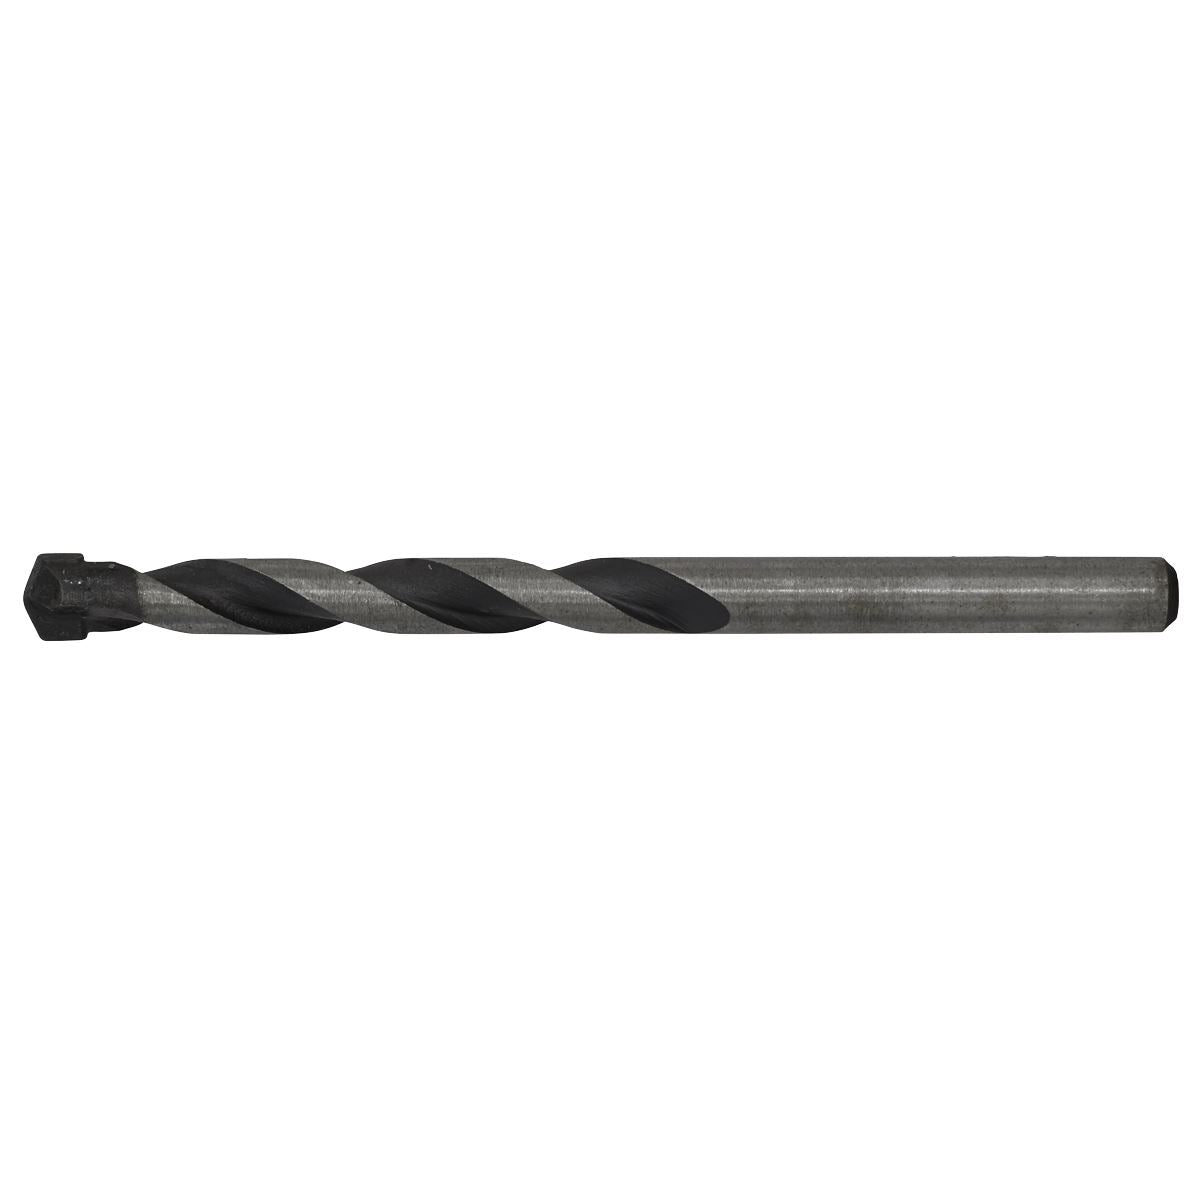 Worksafe by Sealey Straight Shank Rotary Impact Drill Bit Ø9 x 120mm